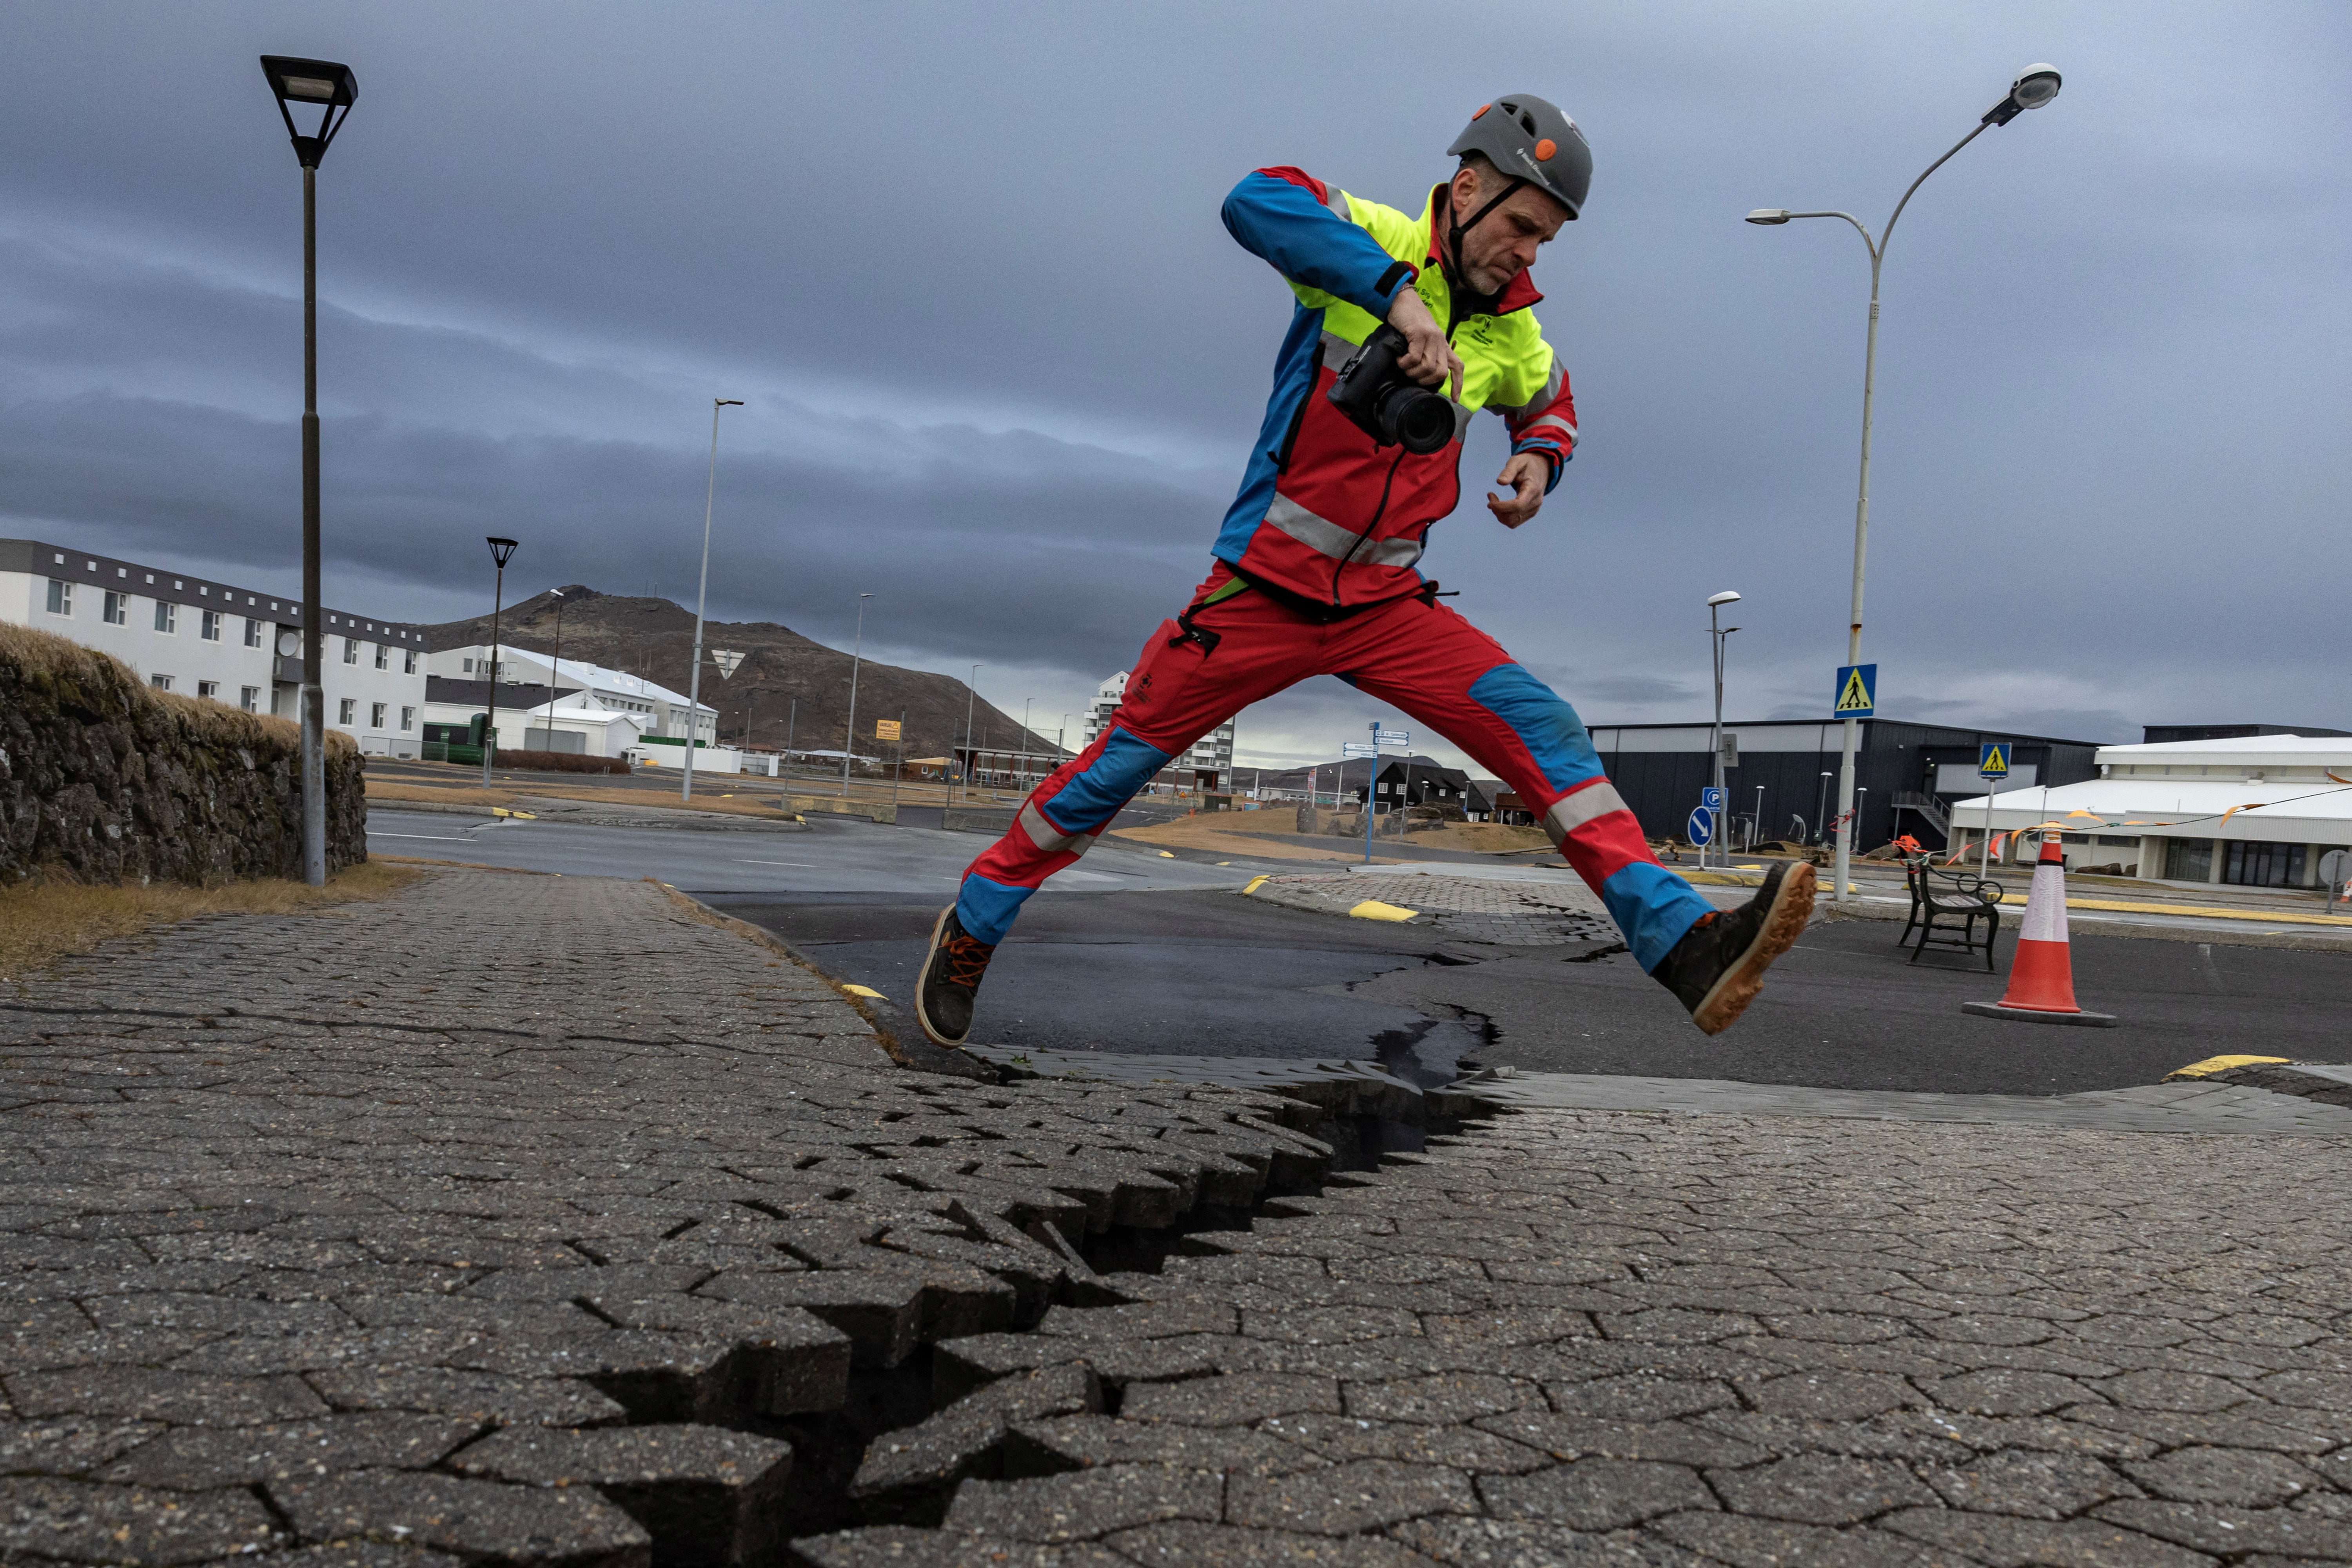 A member of search and rescue team jumps over the crack in a road in the fishing town of Grindavik